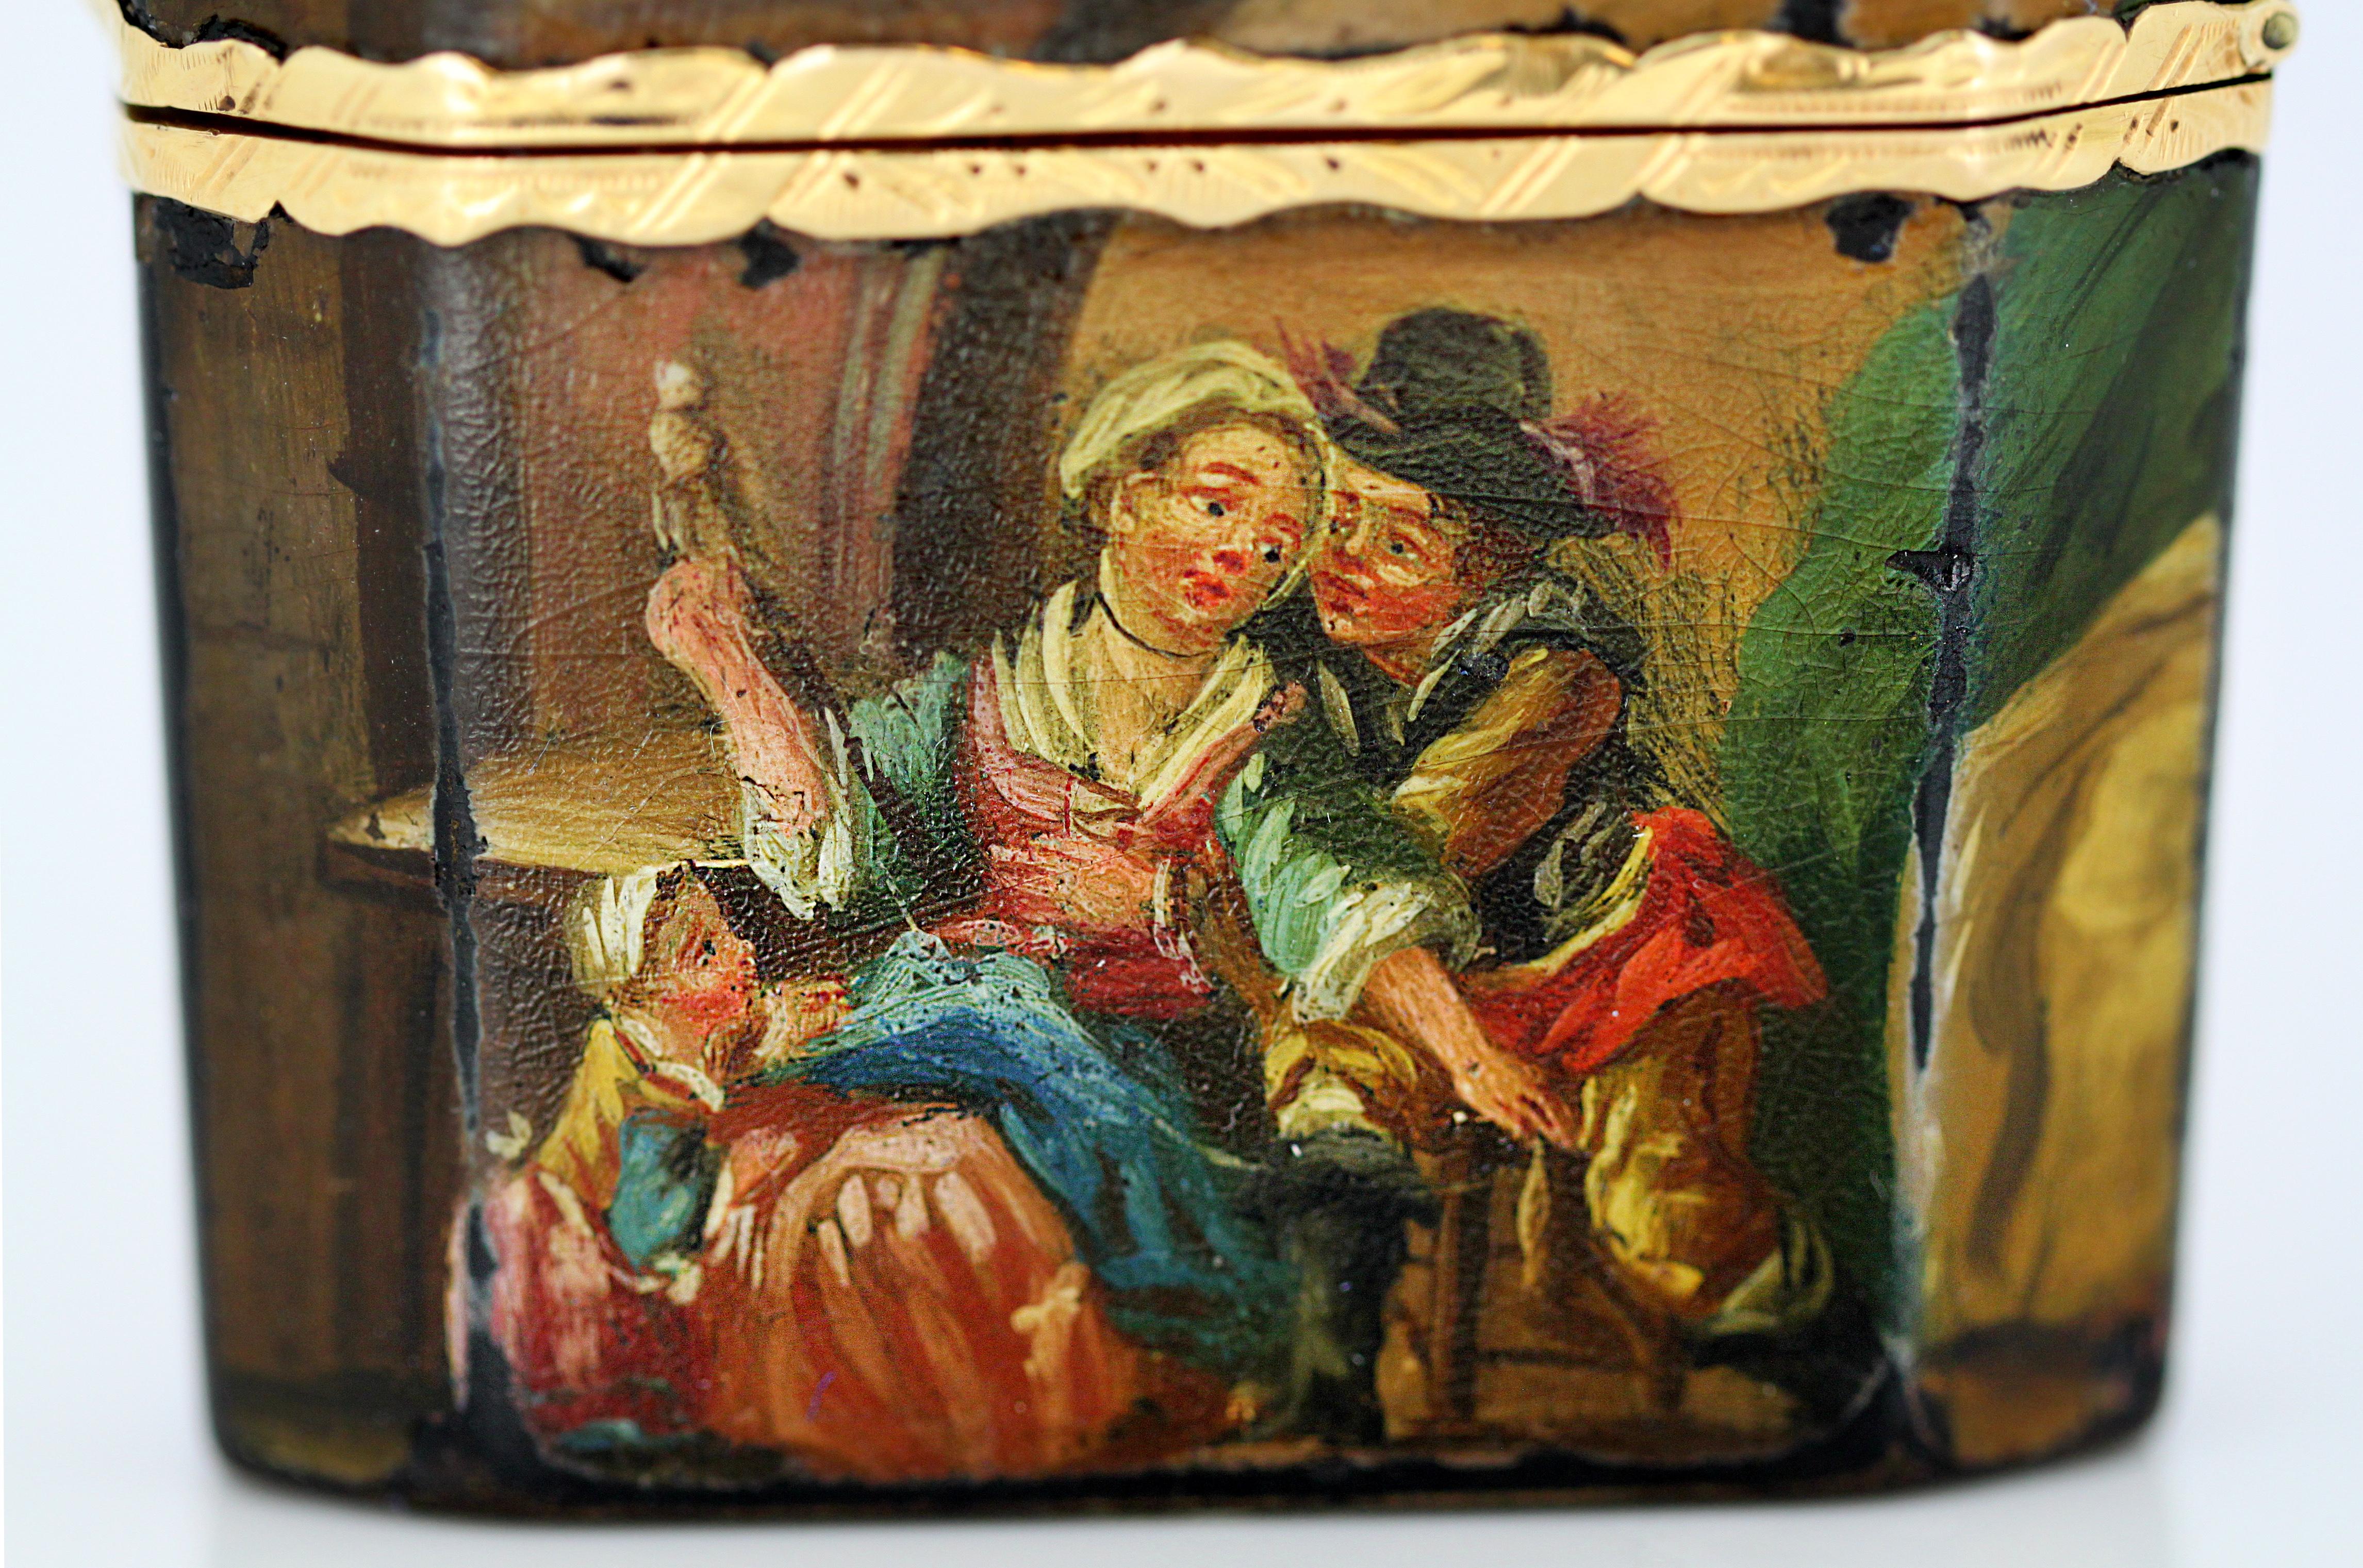 Antique French 18th century (1770) oil painted wooden vanity box with 18k yellow gold.

Made in France Circa 1770.

Makers Mark: JB

Dimensions - 
Length : 5 cm
Width : 2.1 cm
Height : 7.1 cm
Weight: 50 grams

Condition: Item is antique with some